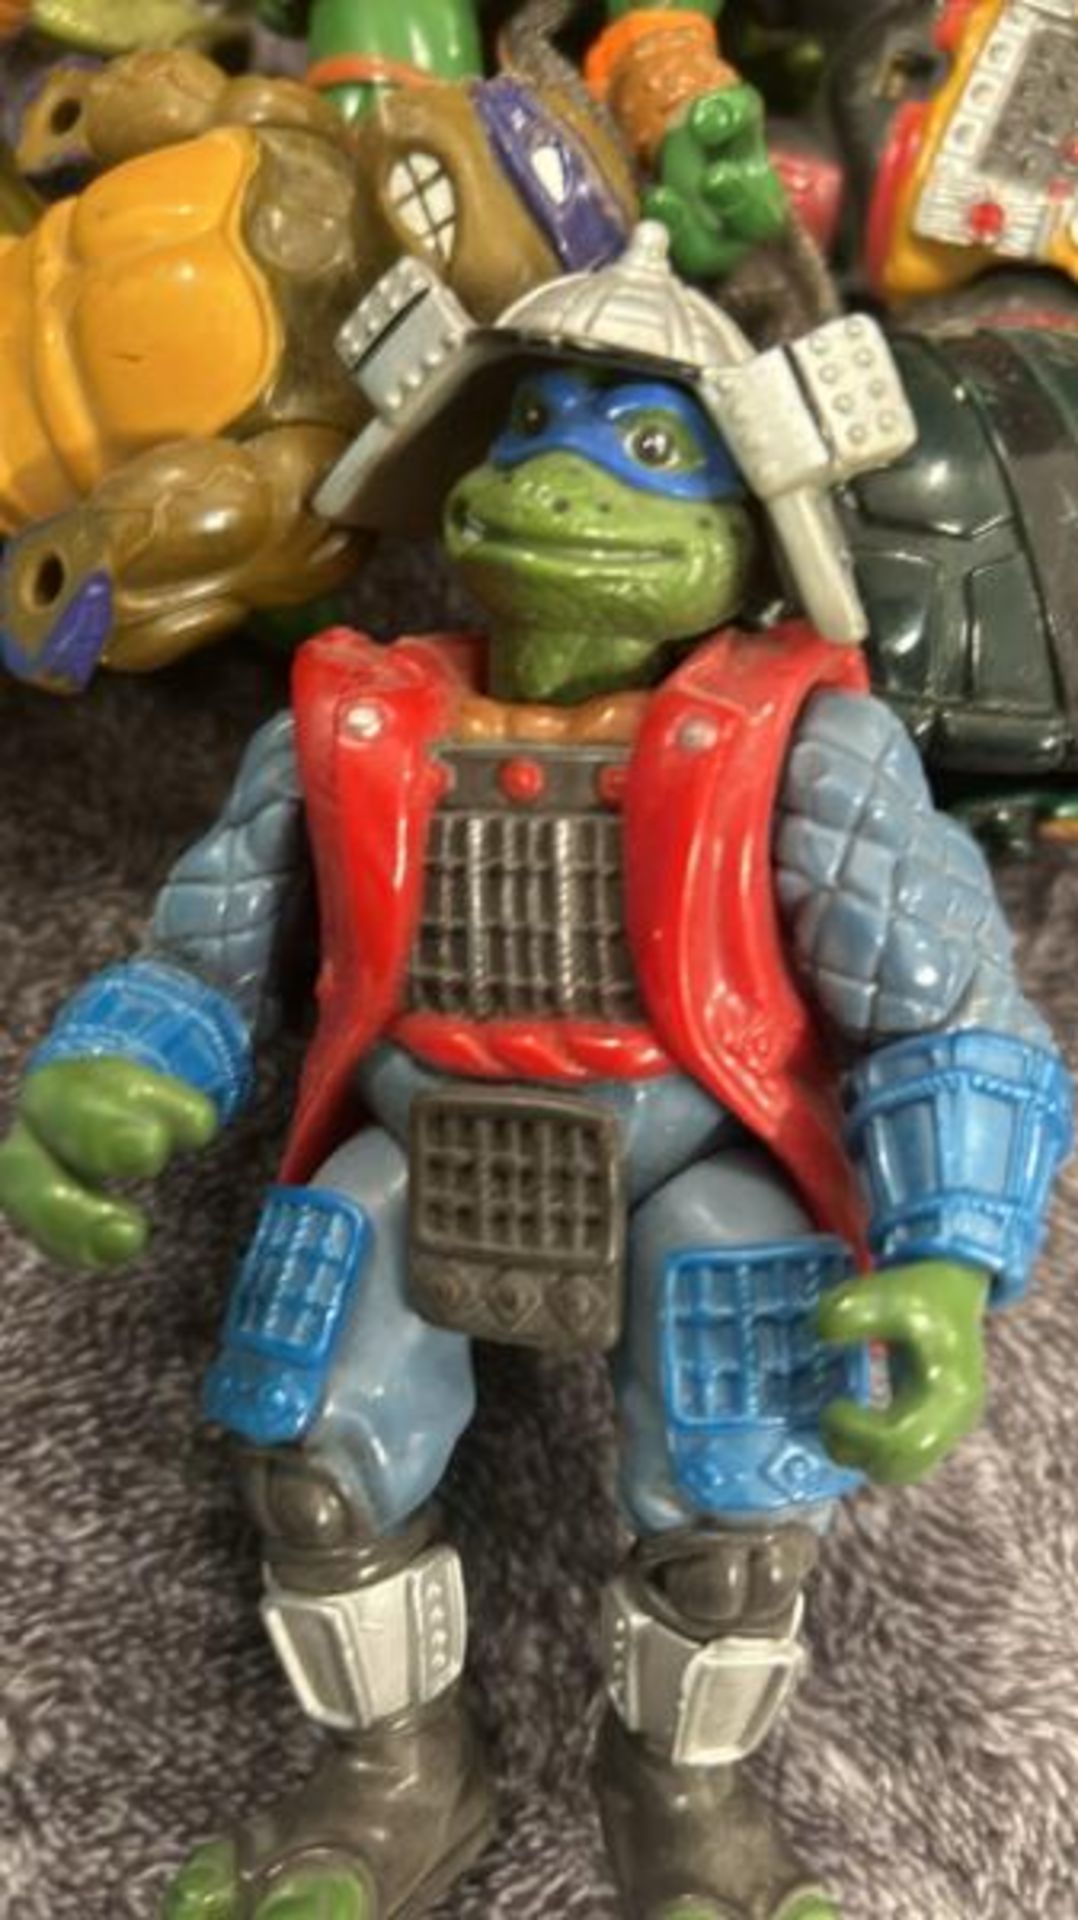 Teenage Mutant Ninja Turtles - Assorted loose figures including some based on the movie versions and - Image 7 of 13